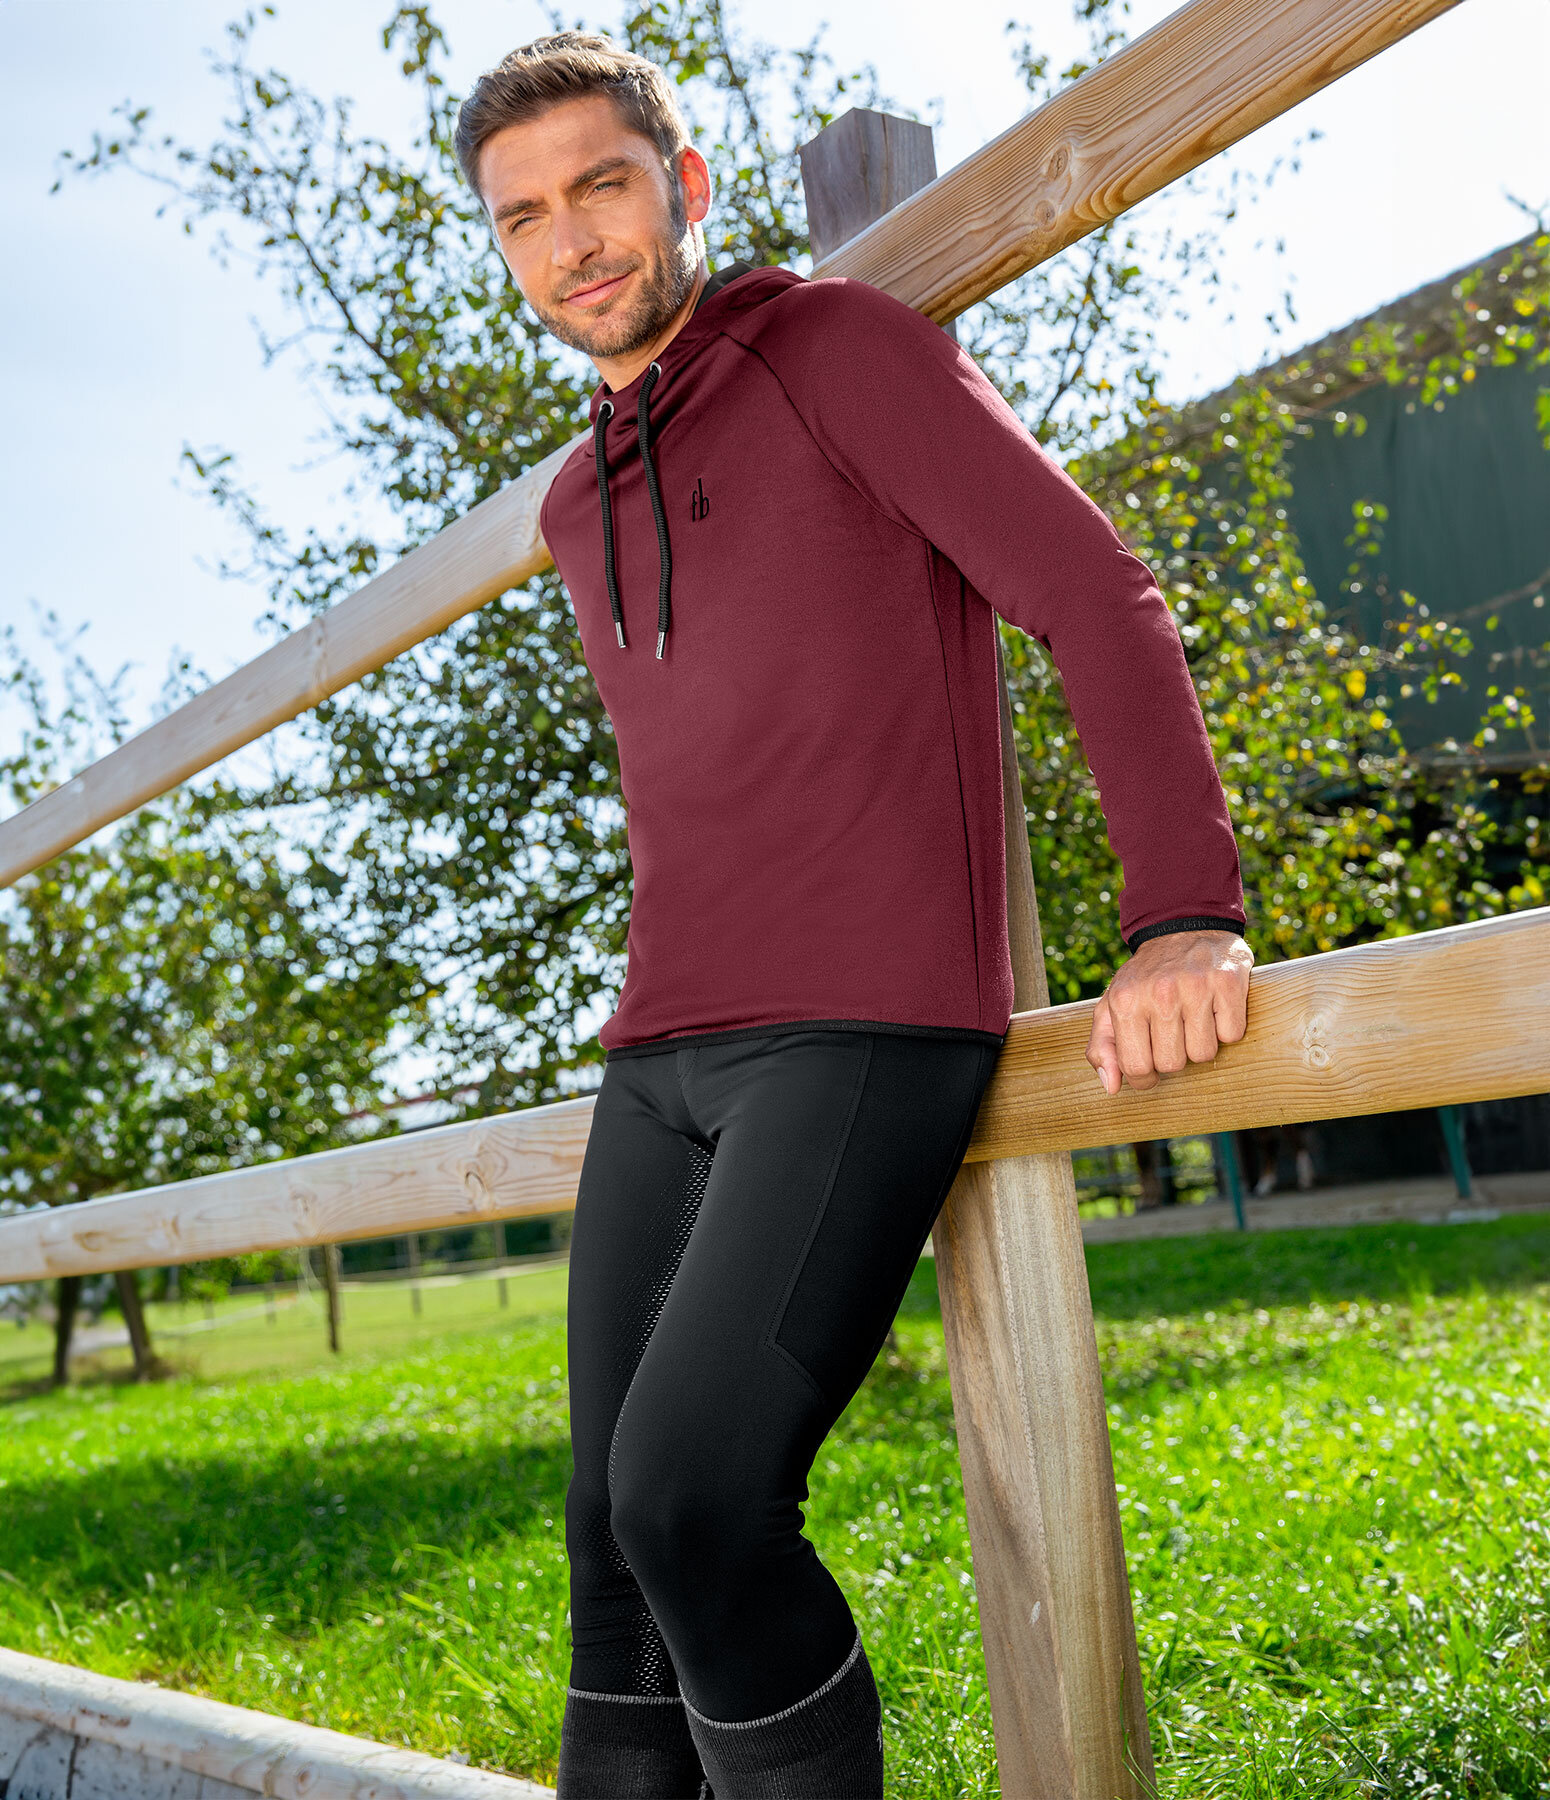 Herren-Outfit Madison in bordeaux